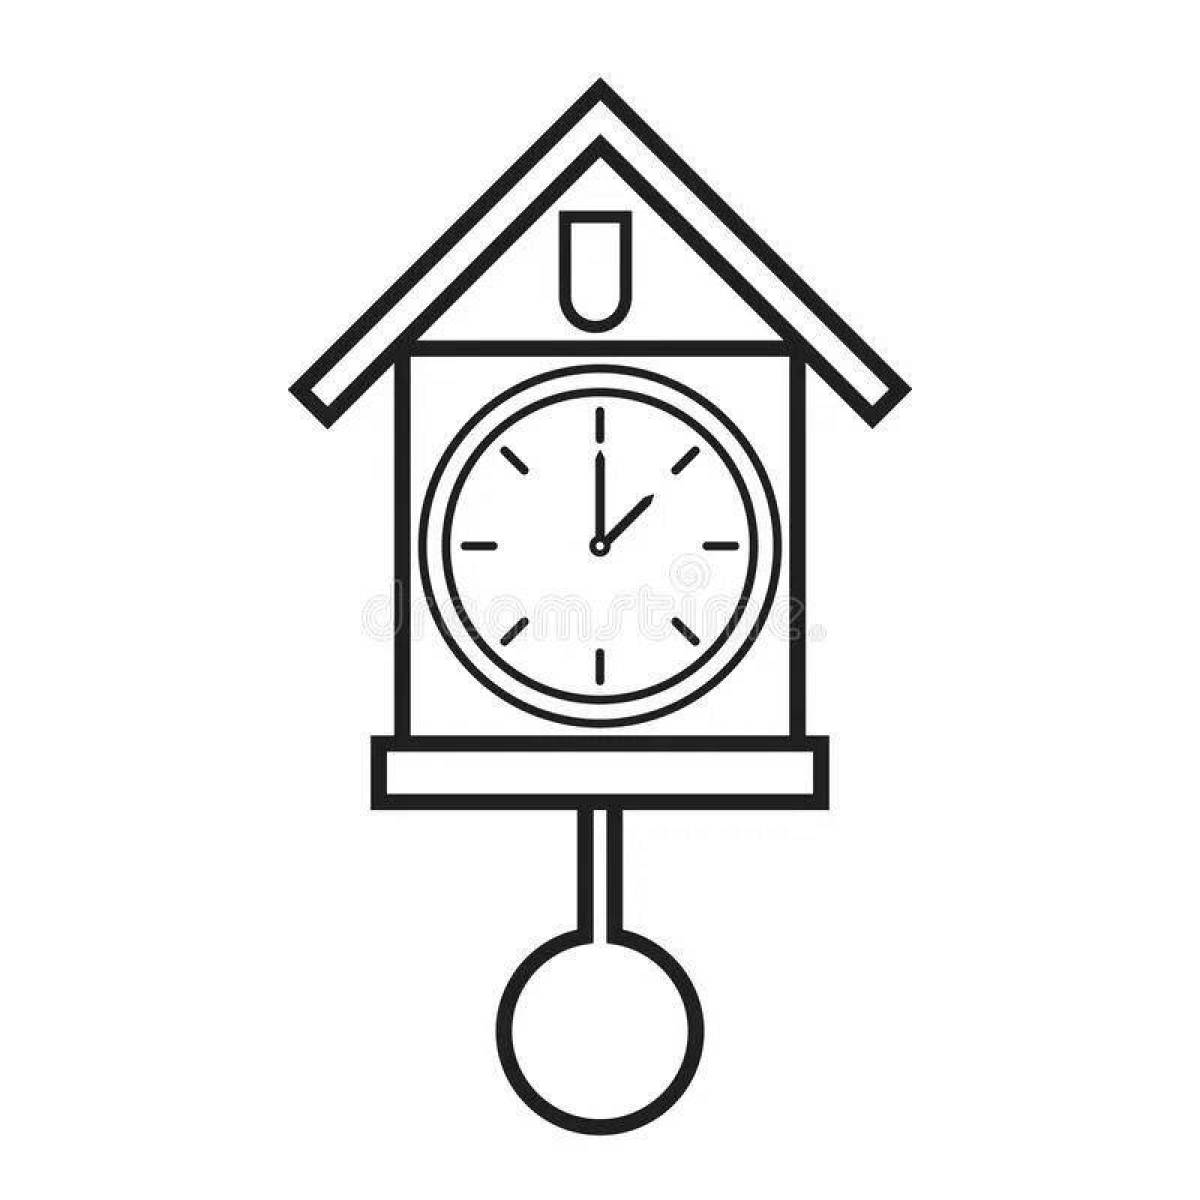 Awesome cuckoo clock coloring pages